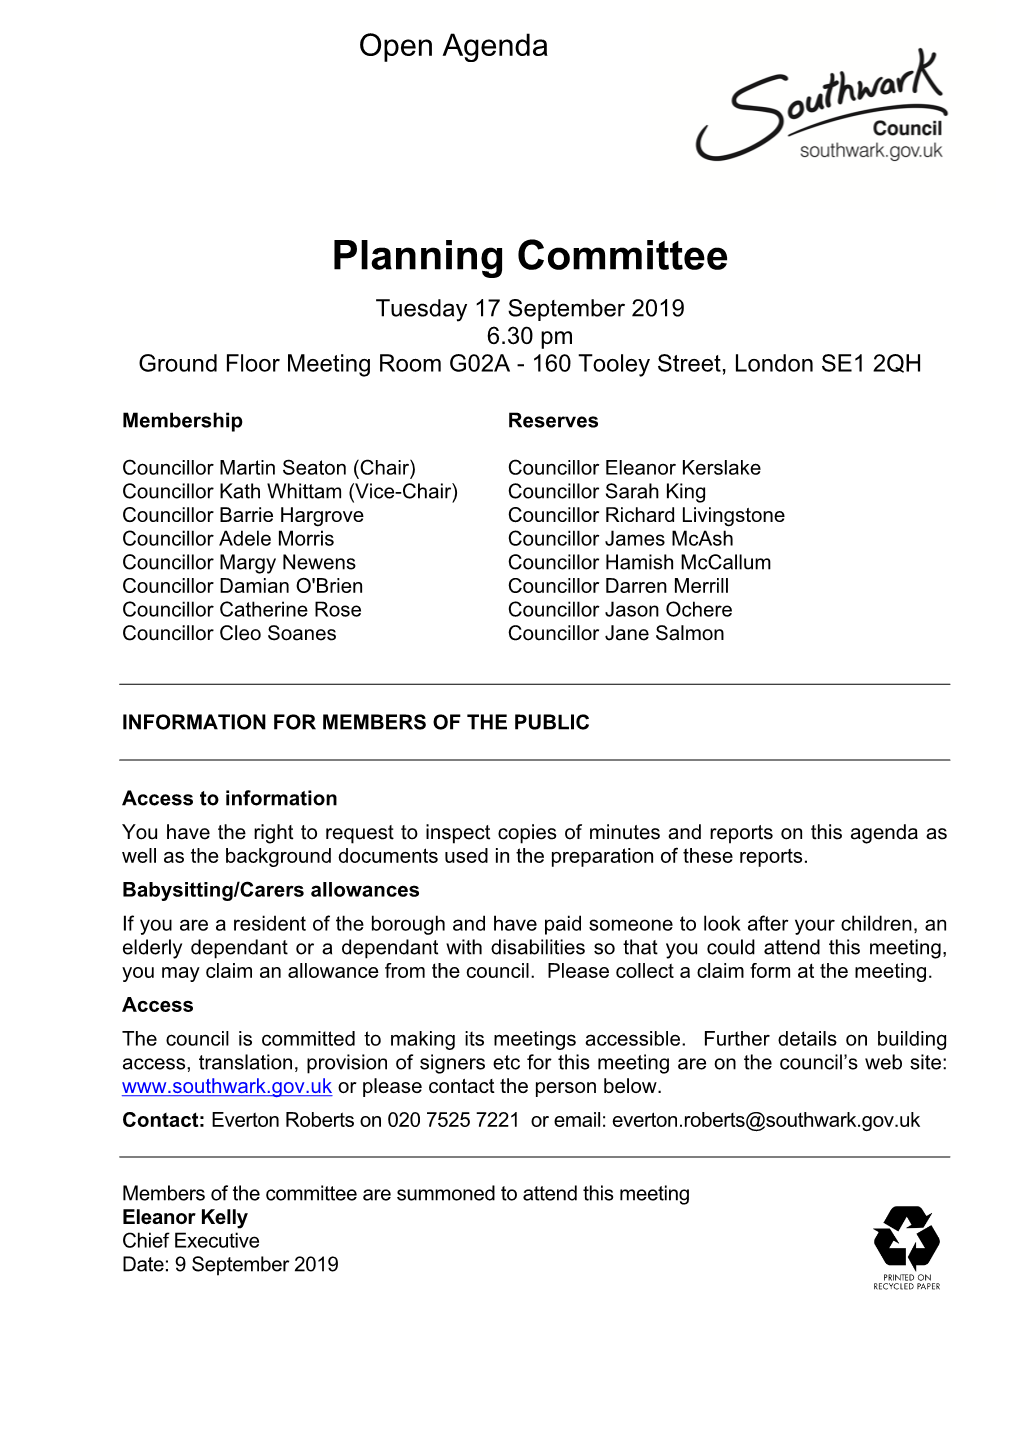 (Public Pack)Agenda Document for Planning Committee, 17/09/2019 18:30